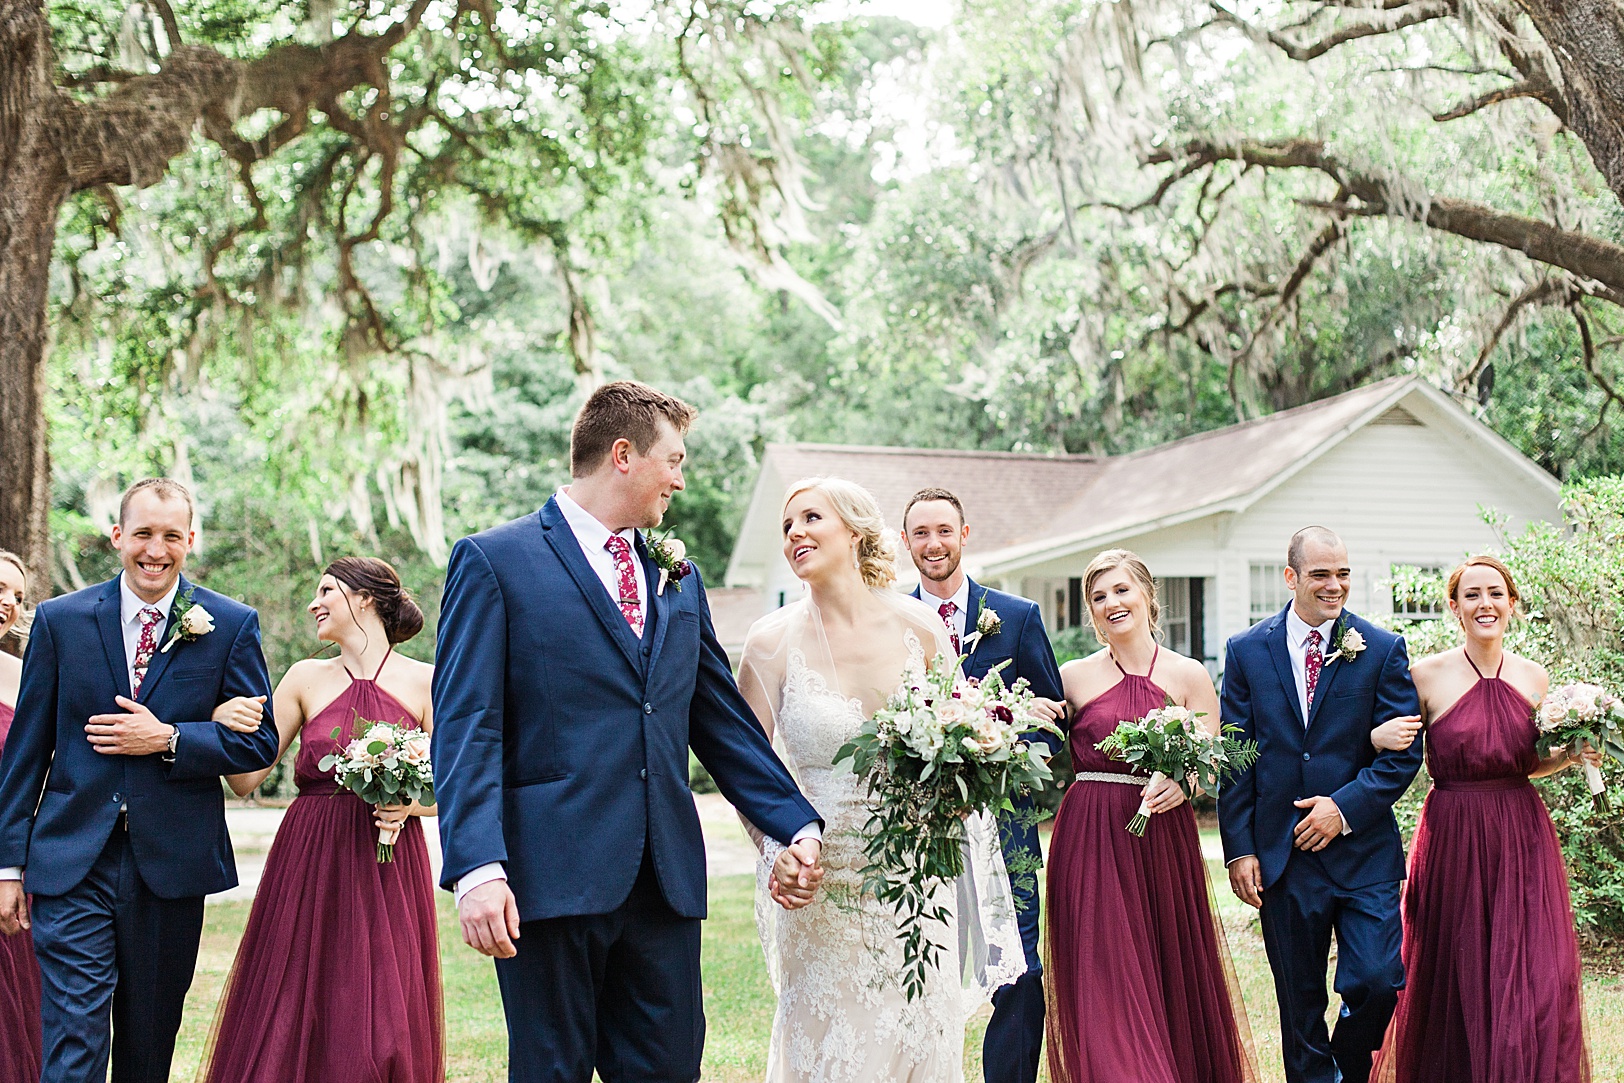 Bride and Groom with Wedding Party | Kaitlin Scott Photography